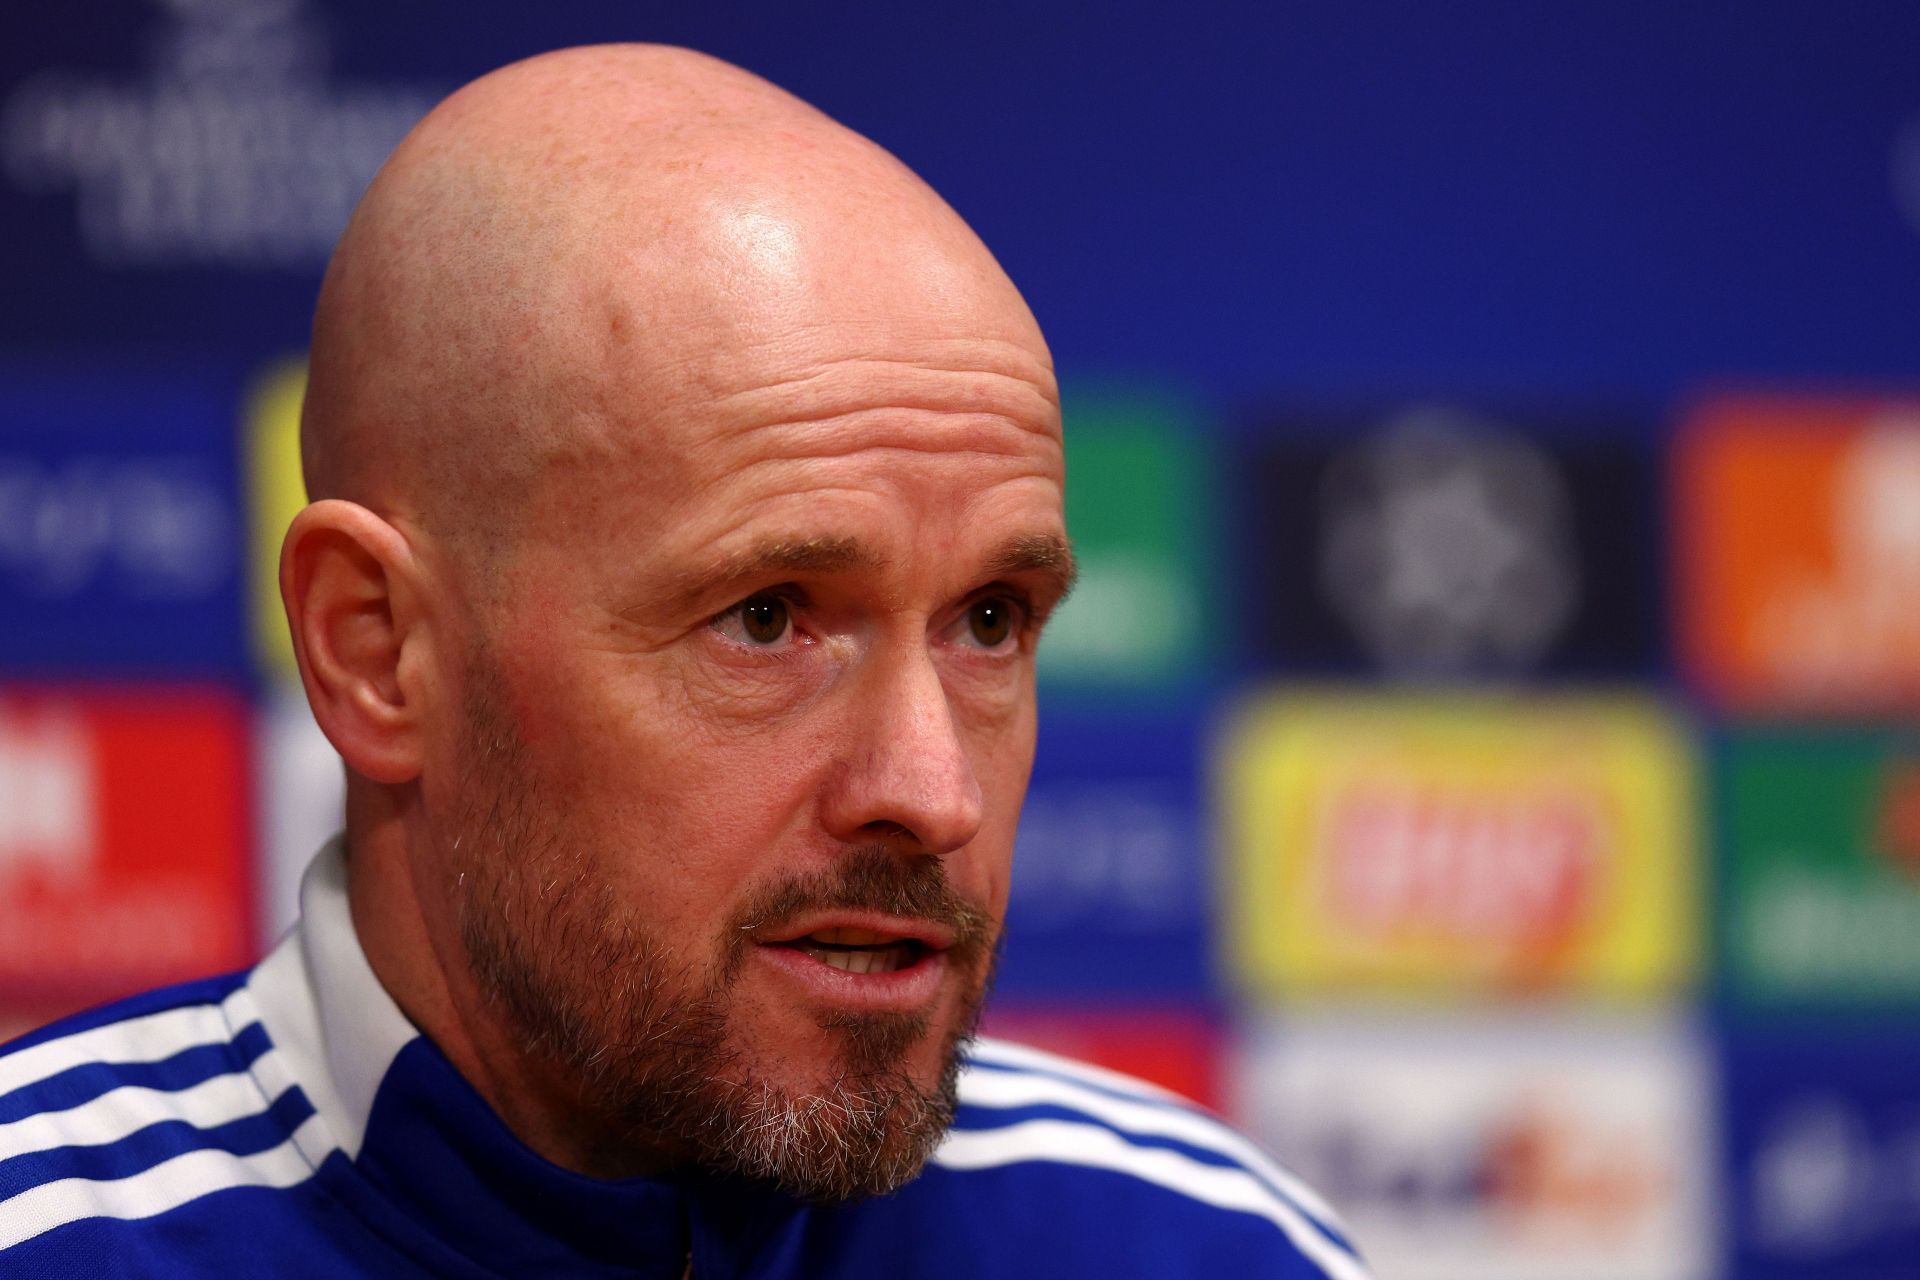 Erik ten Hag is set to take charge at Old Trafford this summer.